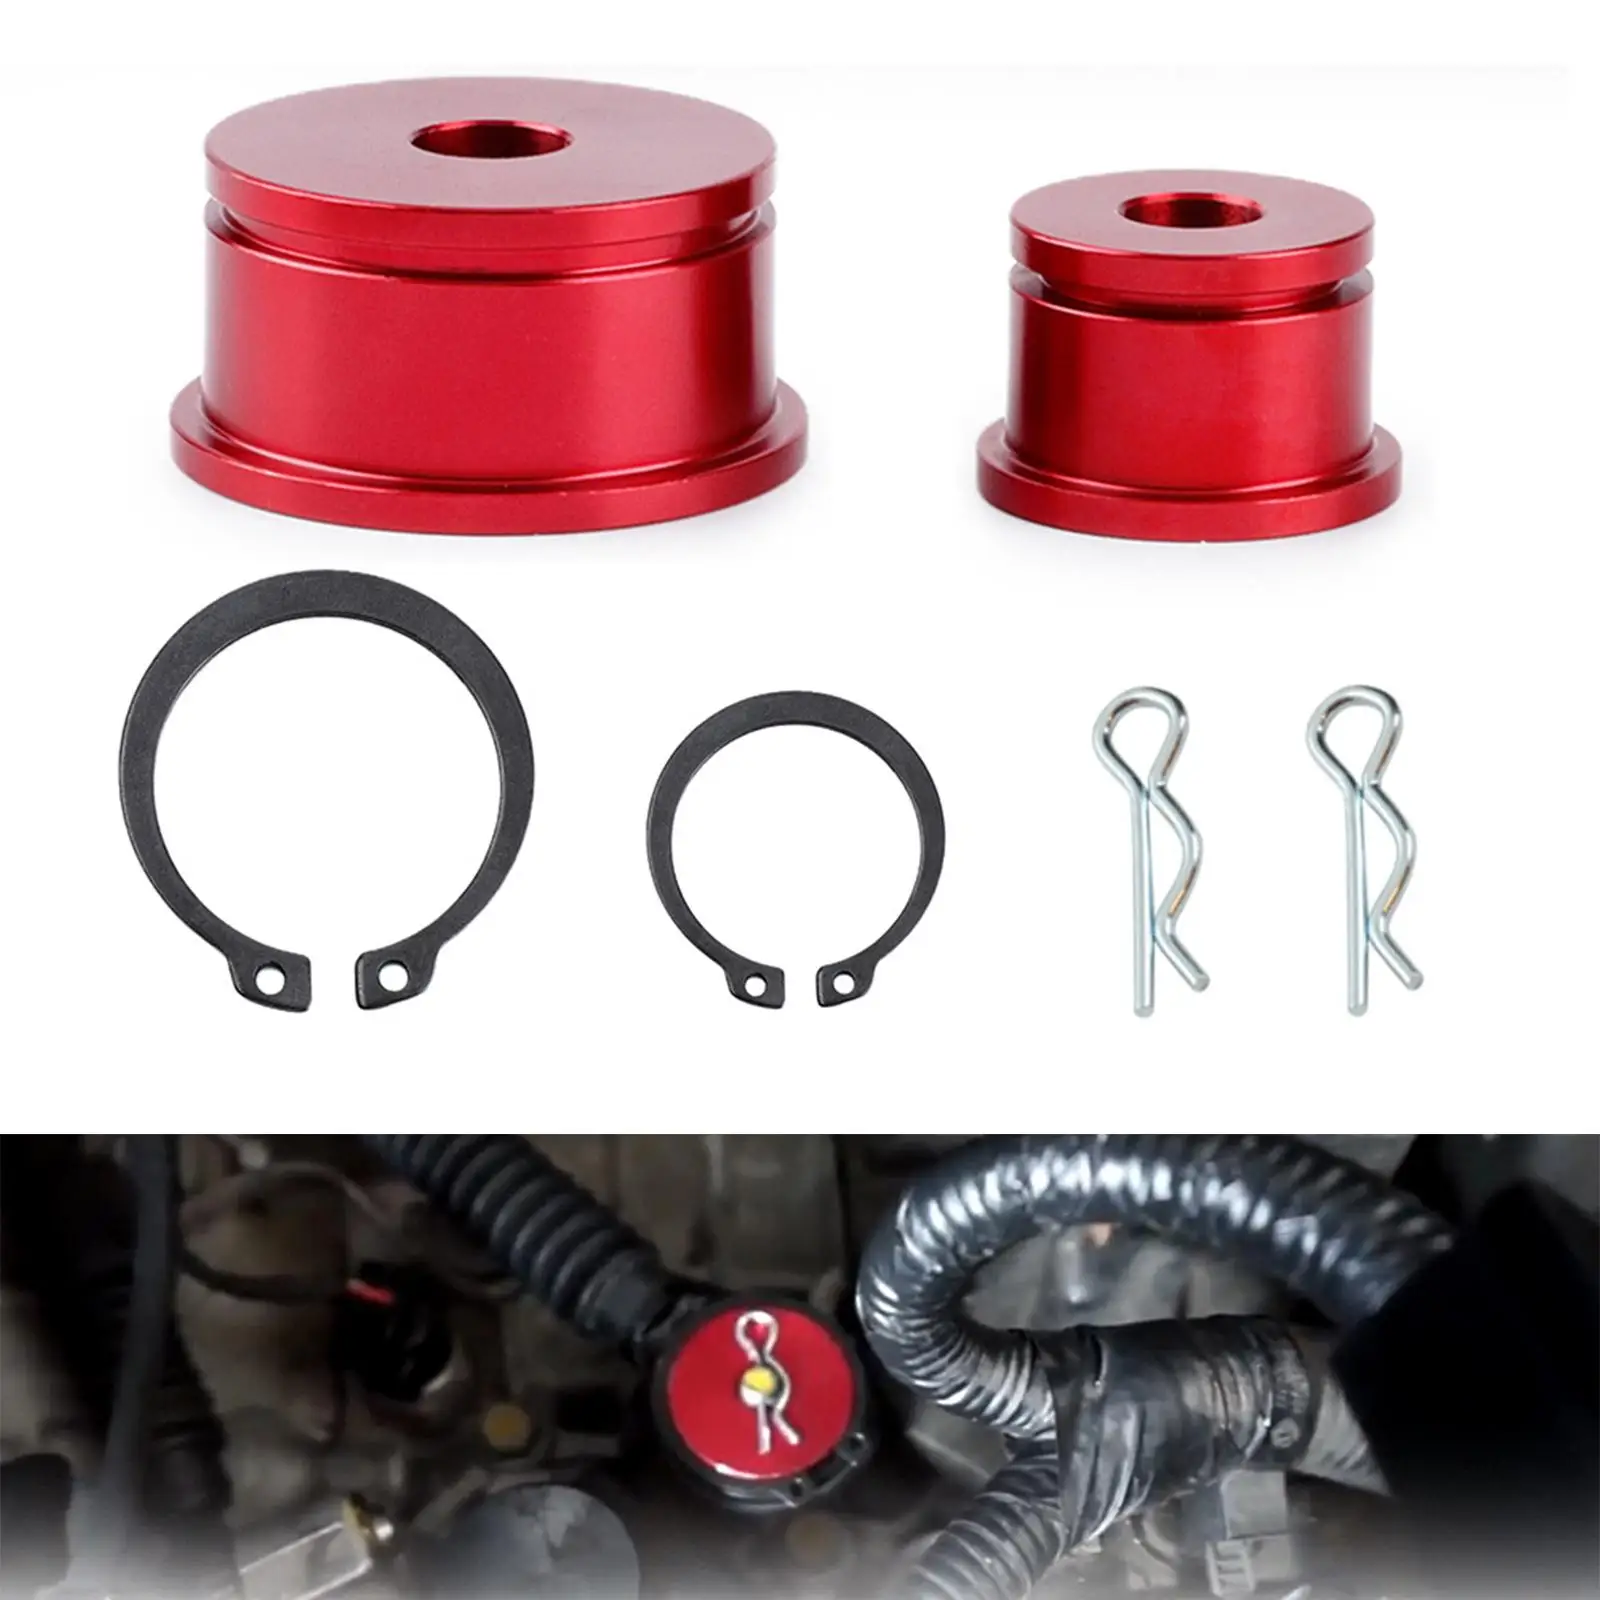 Shifter Cable Bushings Kit Aluminum Alloy Durable Fit for Mitsubishi Evolution VII iX Replacement Easy to Install Parts